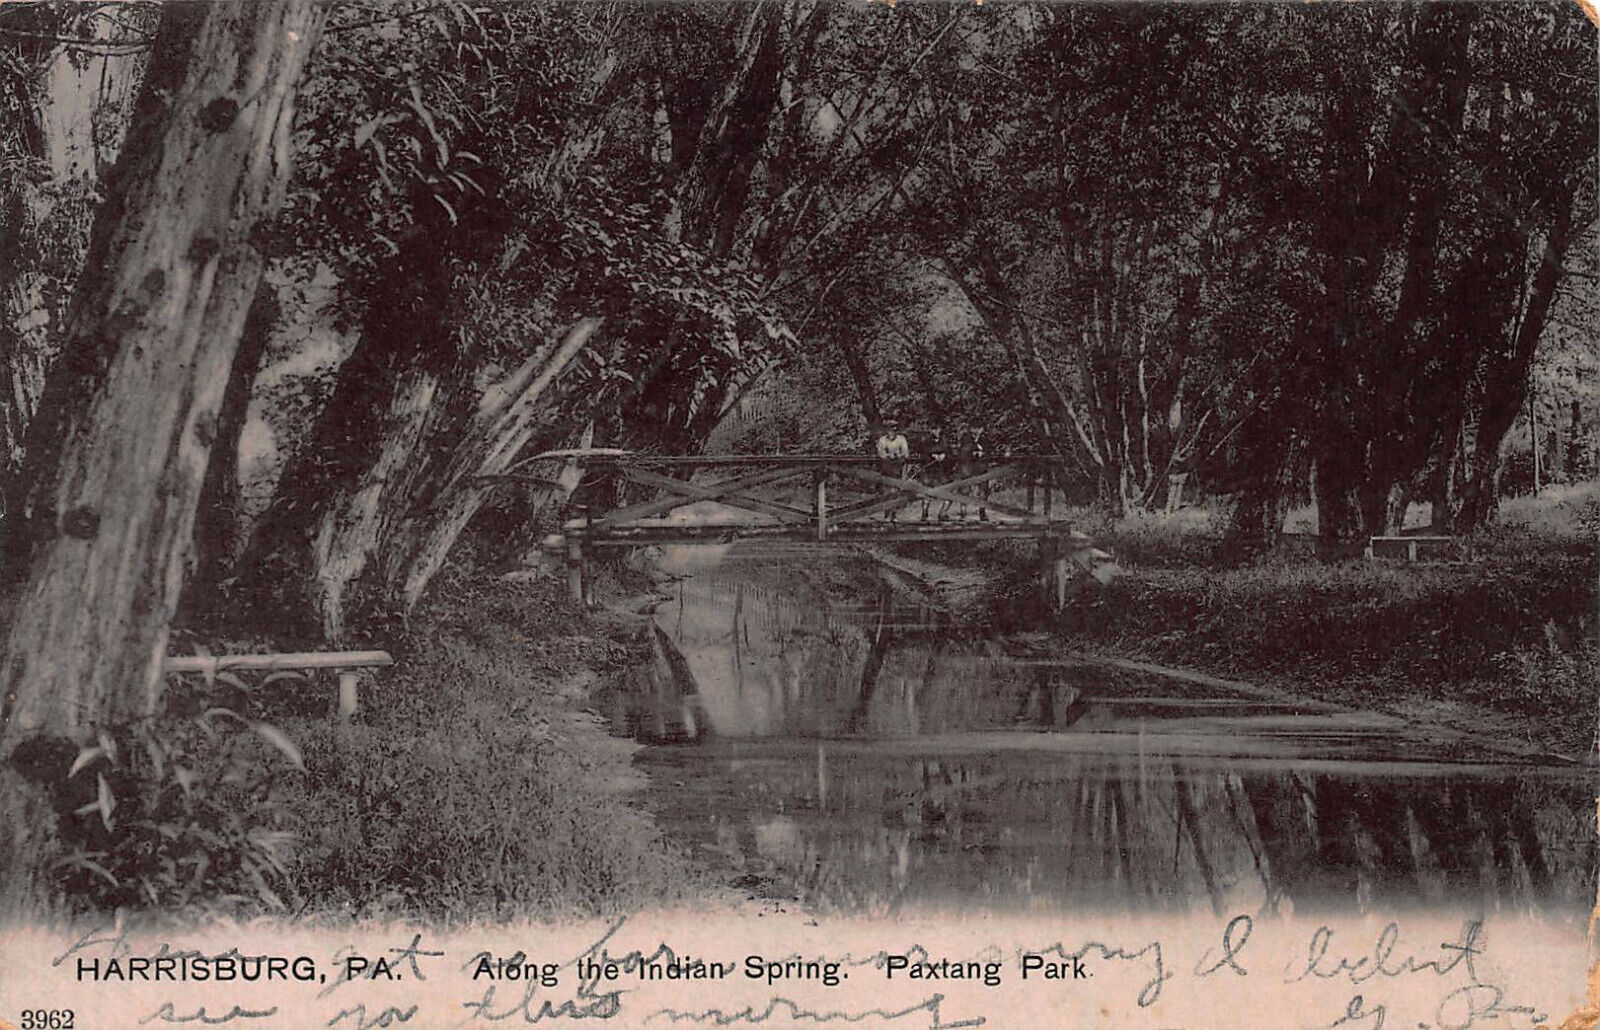 Along the Indian Spring, Paxtang Park, Harrisburg, PA., postcard, used in 1907